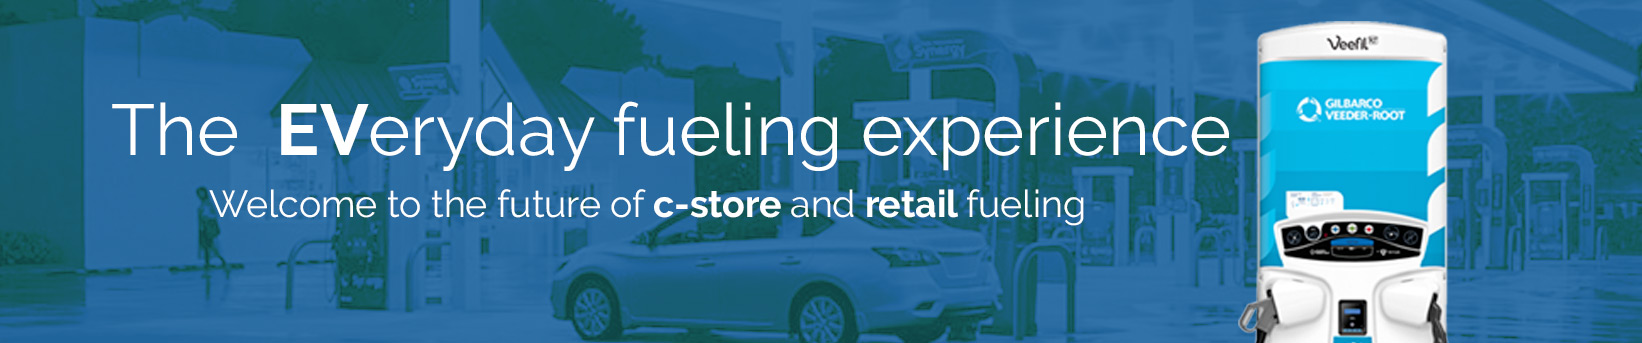 The EVeryday fueling experience. Welcome to the future of c-store and retail fueling